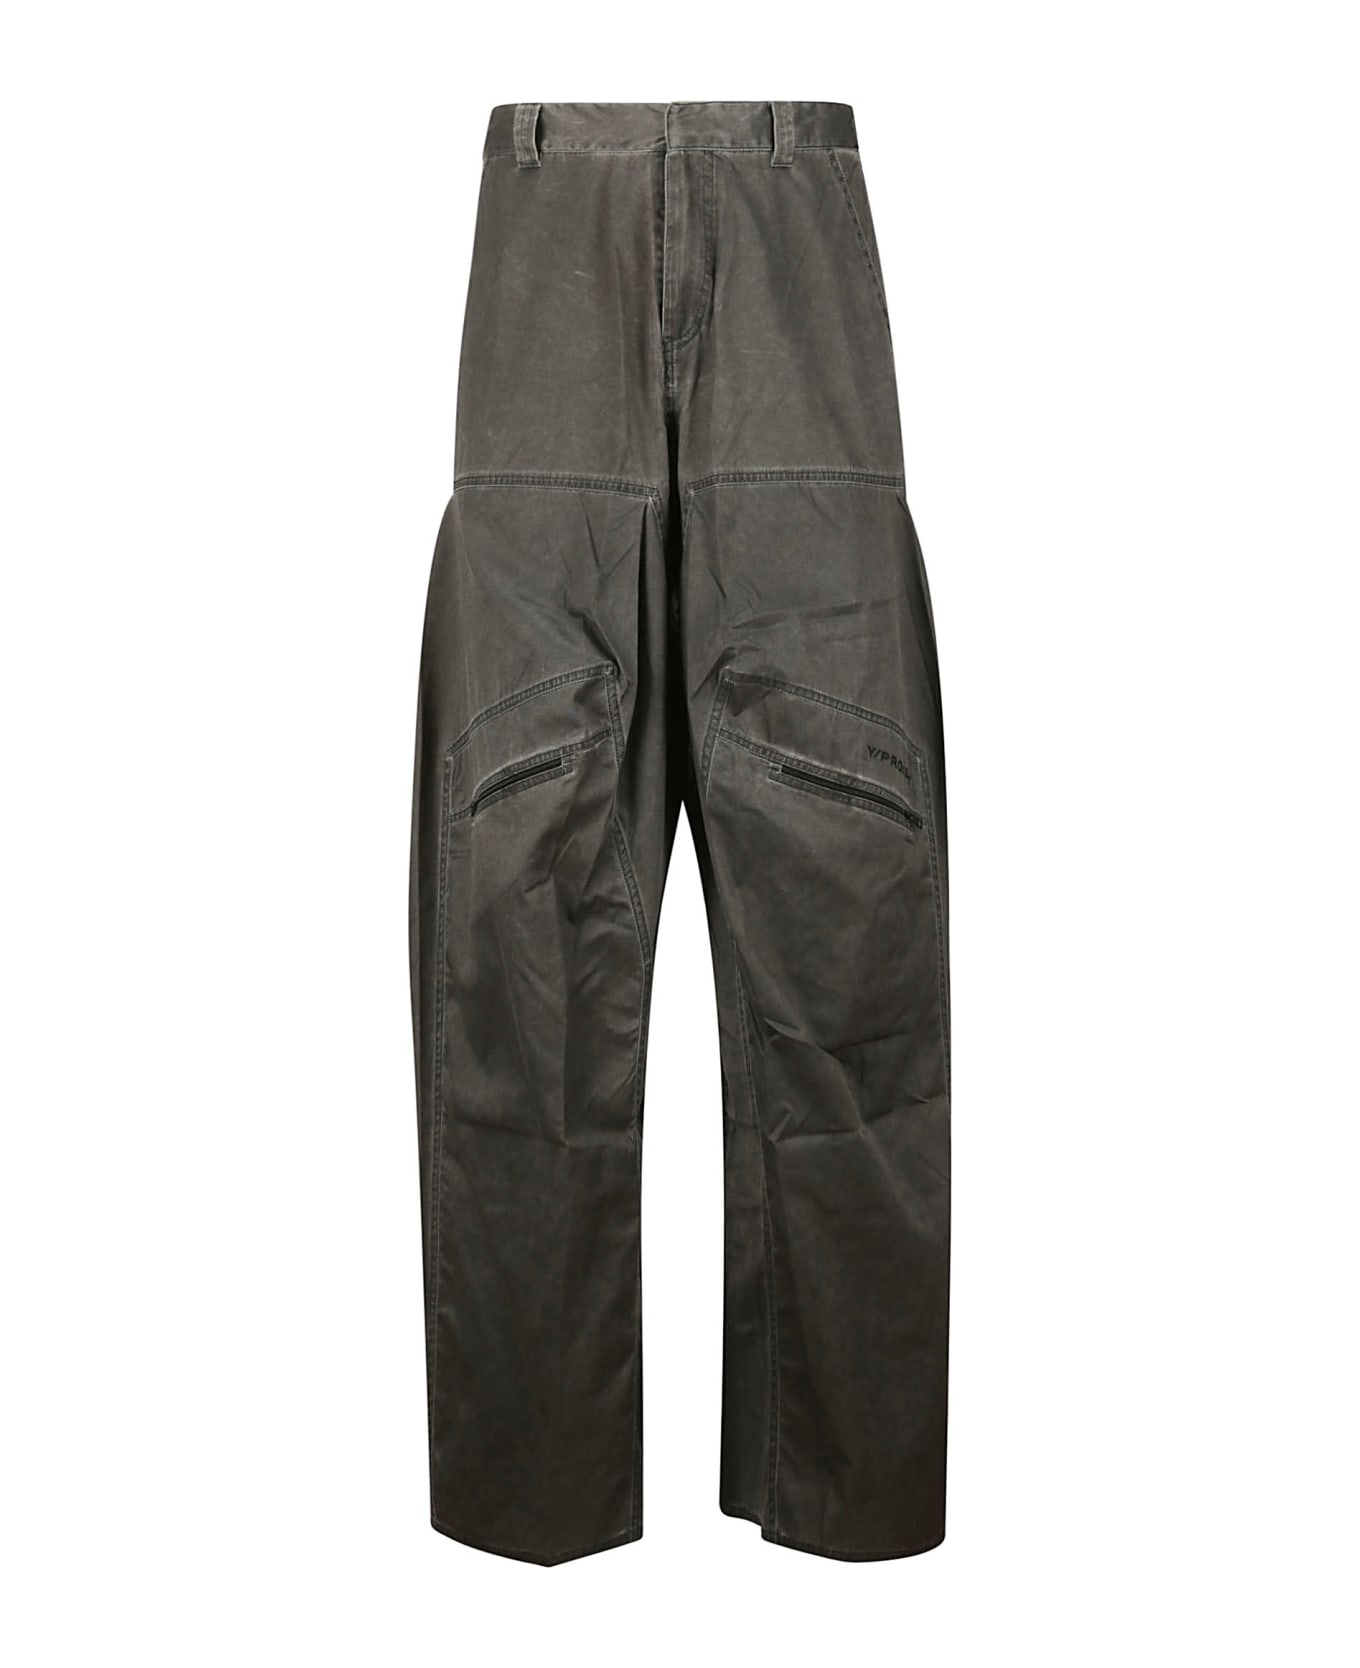 Y/Project Pop-up Pants - WASHED BLACK